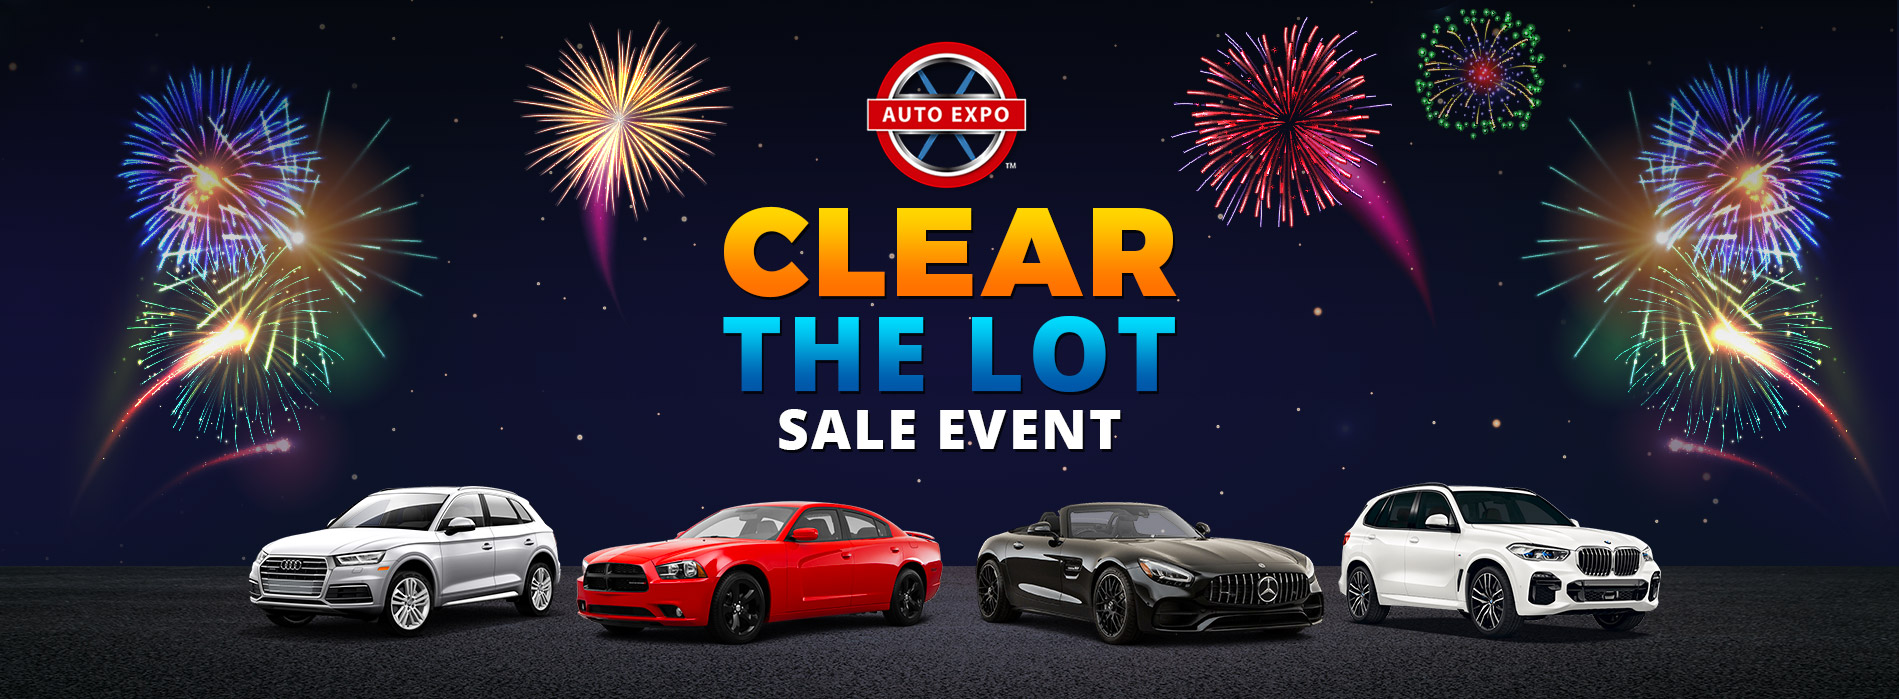 Clear the lot sale event